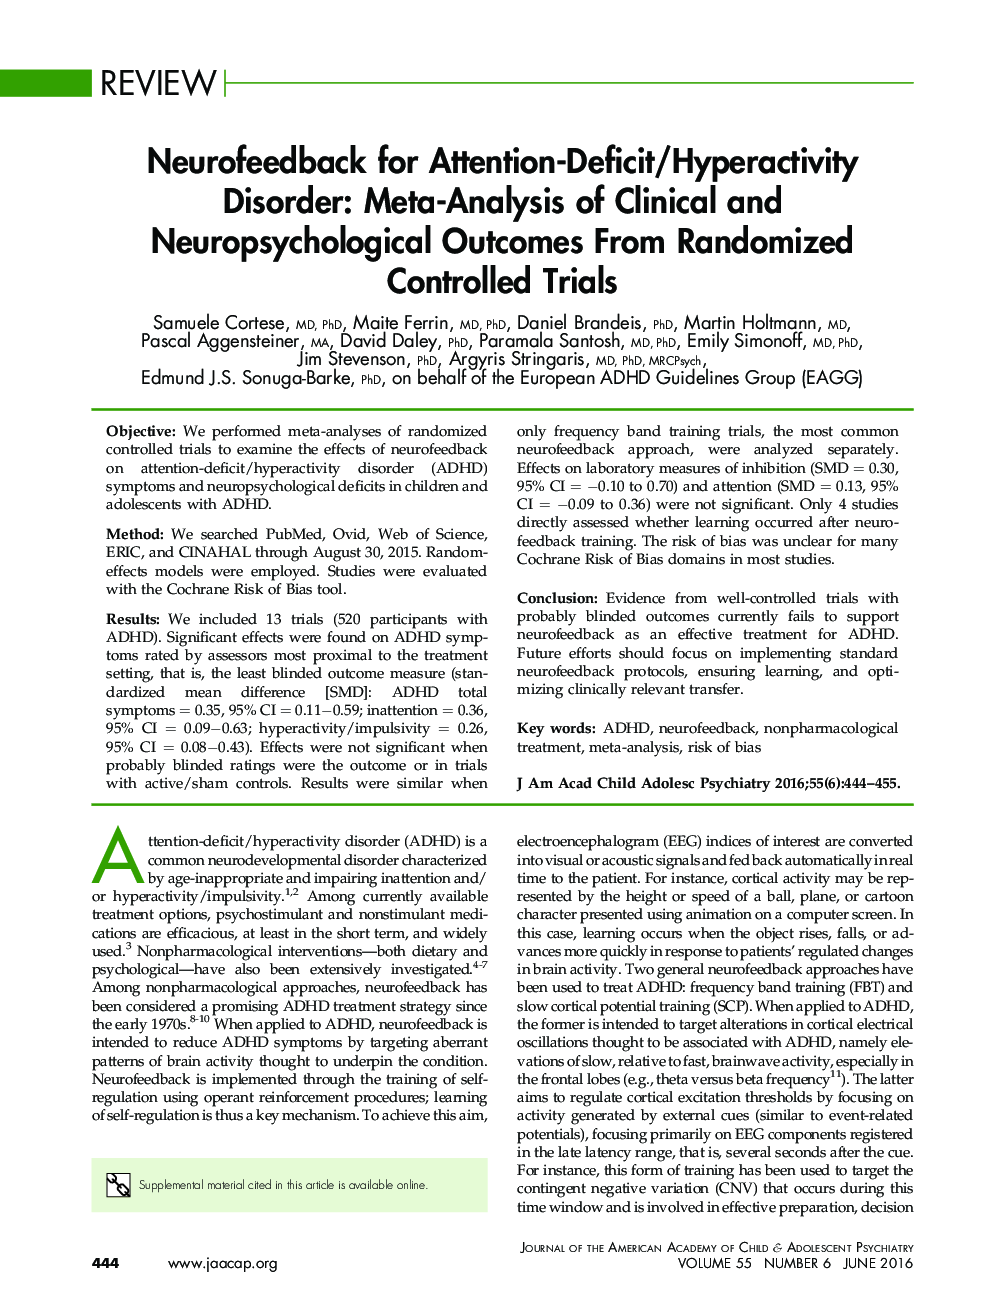 Neurofeedback for Attention-Deficit/Hyperactivity Disorder: Meta-Analysis of Clinical and Neuropsychological Outcomes From Randomized Controlled Trials